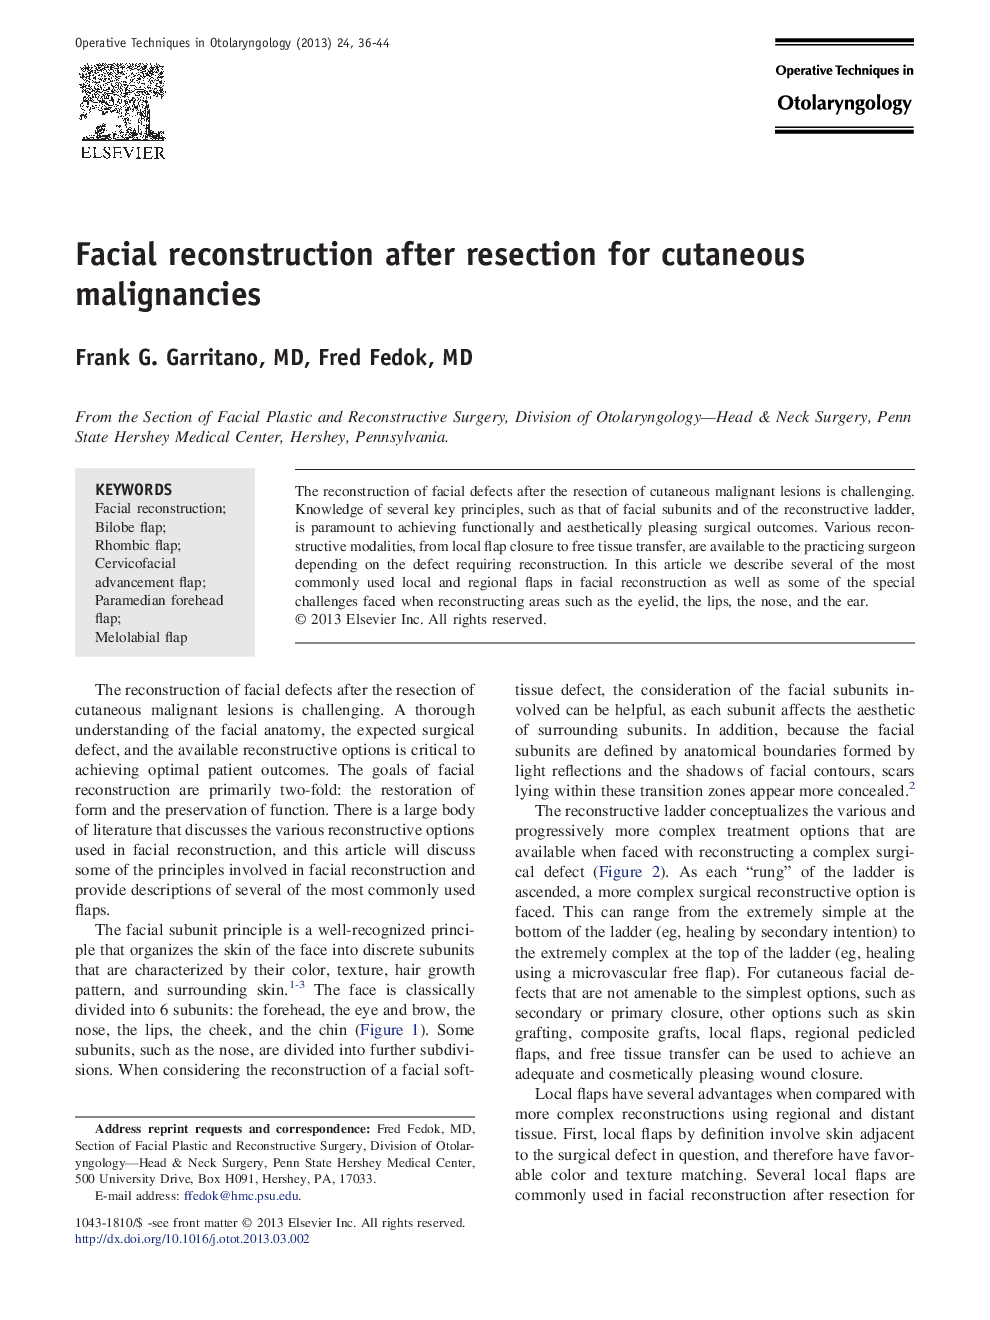 Facial reconstruction after resection for cutaneous malignancies